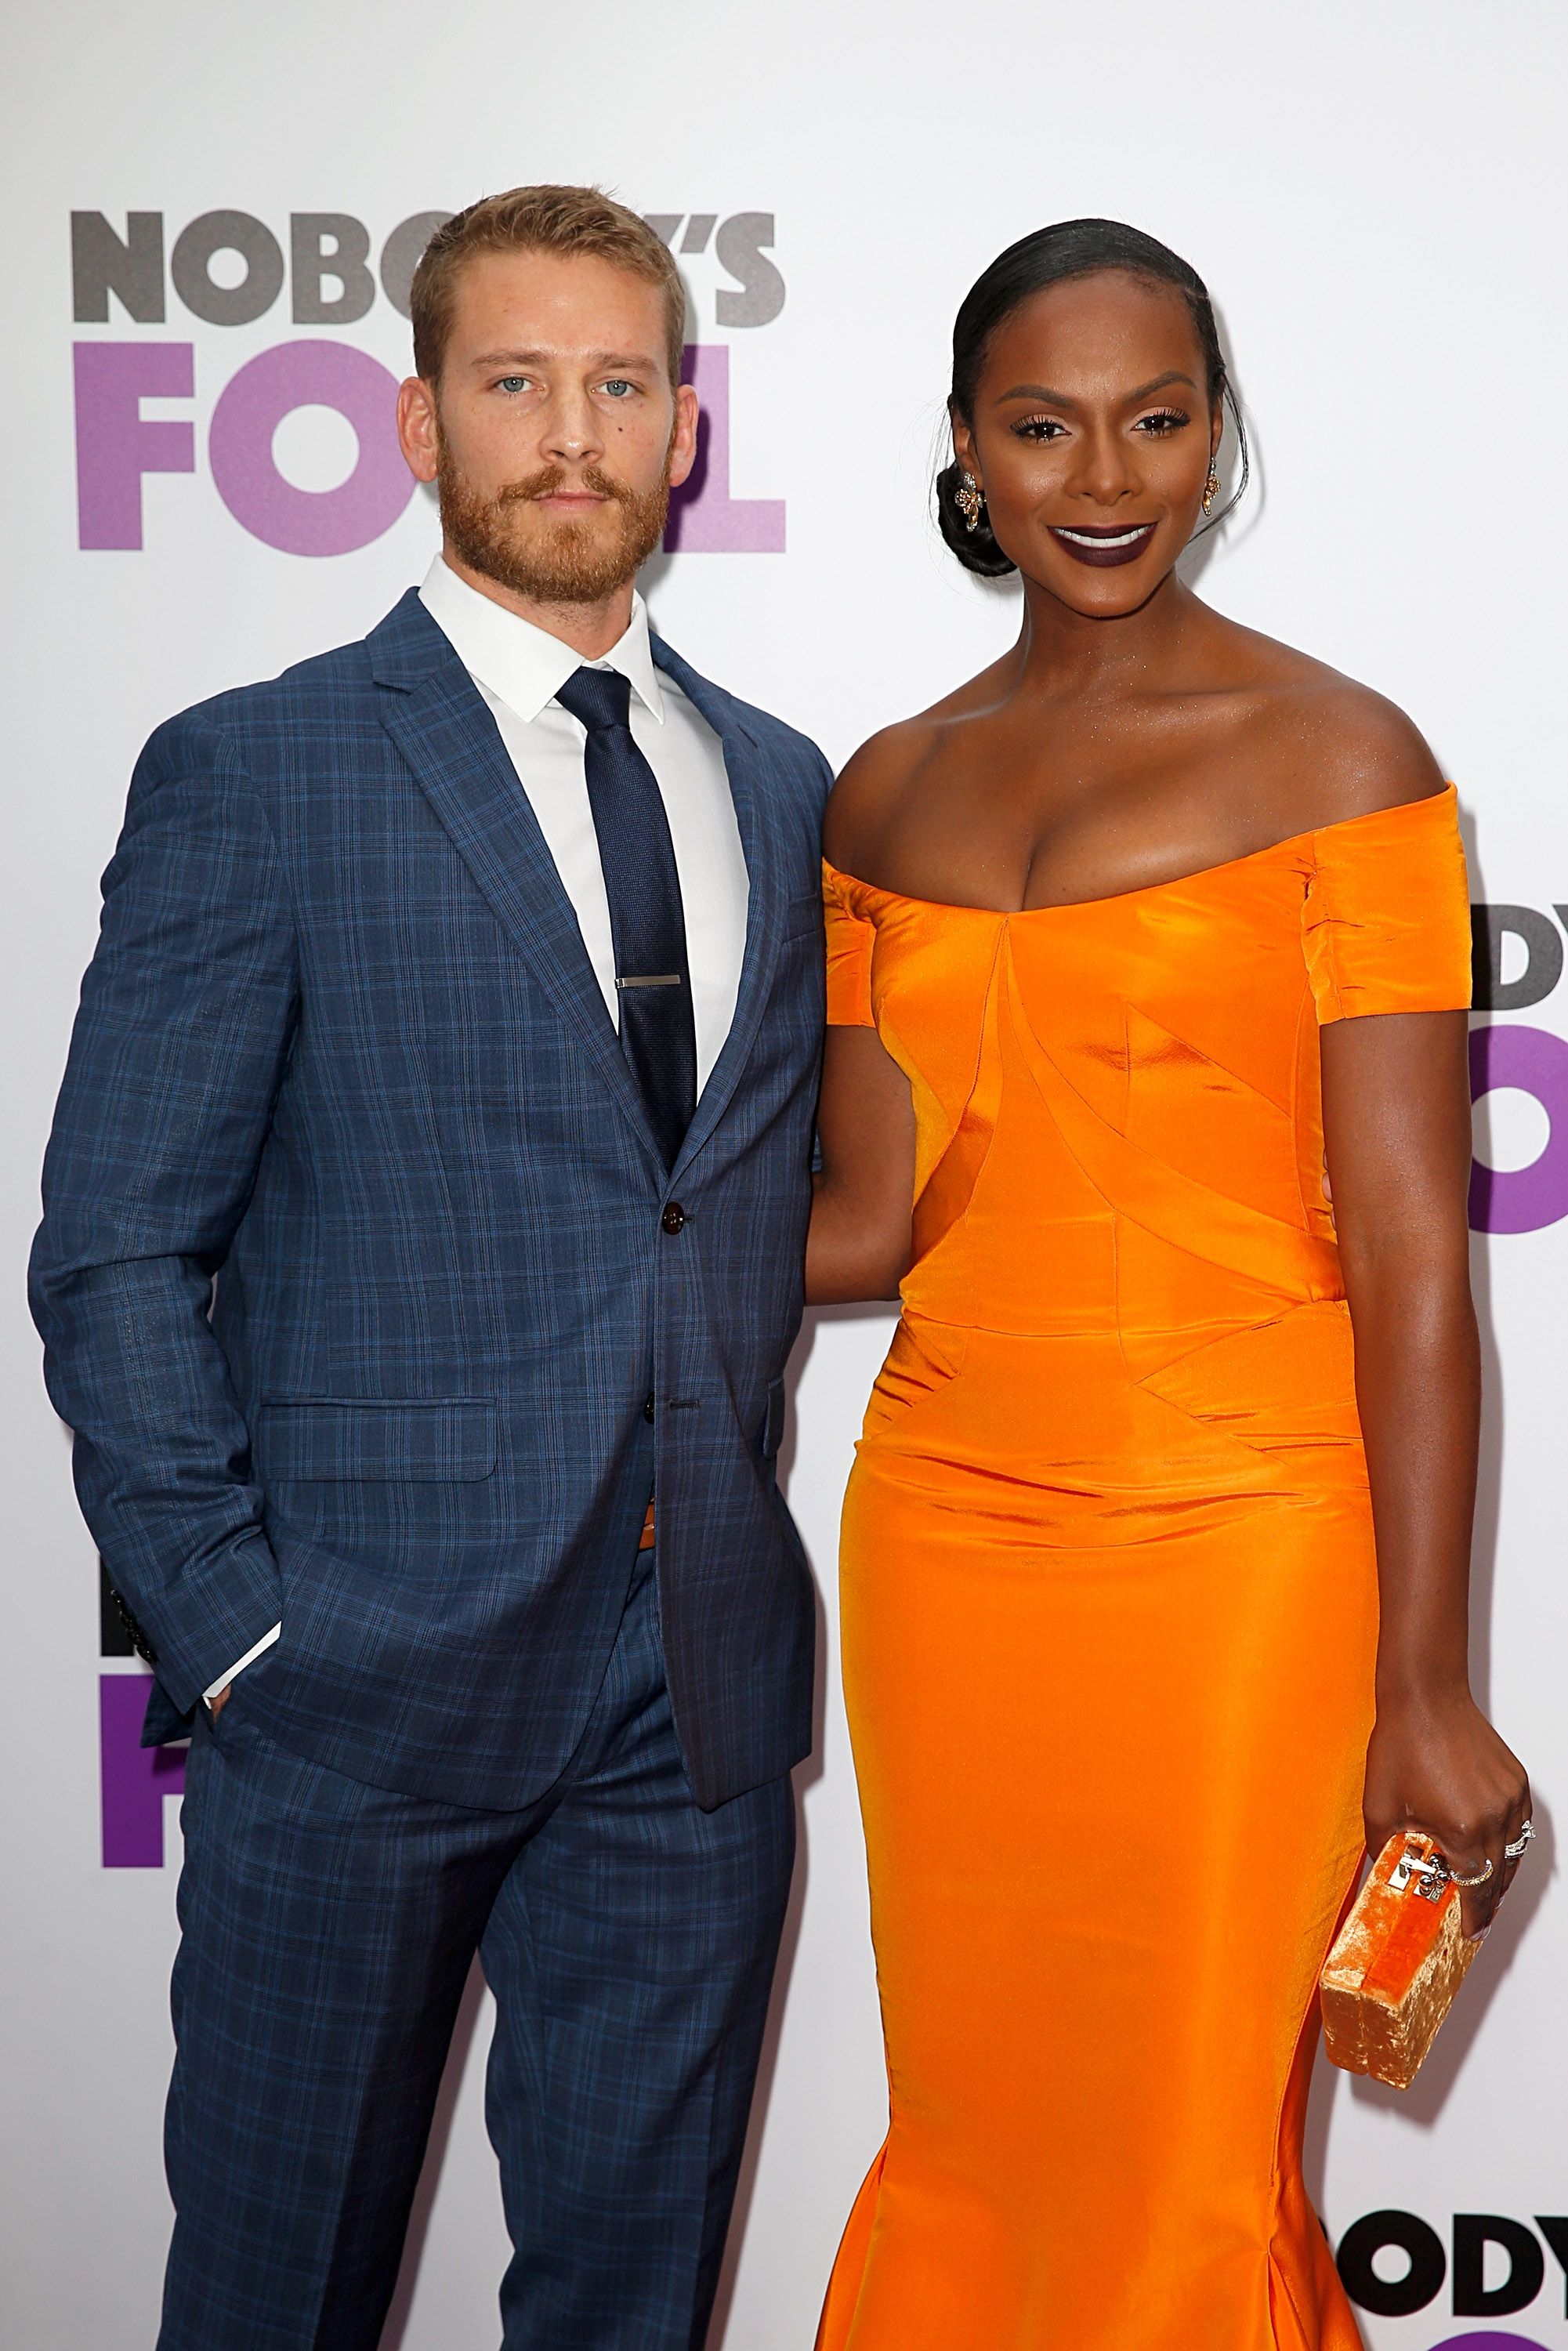 Nicholas James and Tika Sumpter at the 'Nobody's Fool' New York premiere at AMC Lincoln Square Theater on October 28, 2018 | Photo: Getty Images